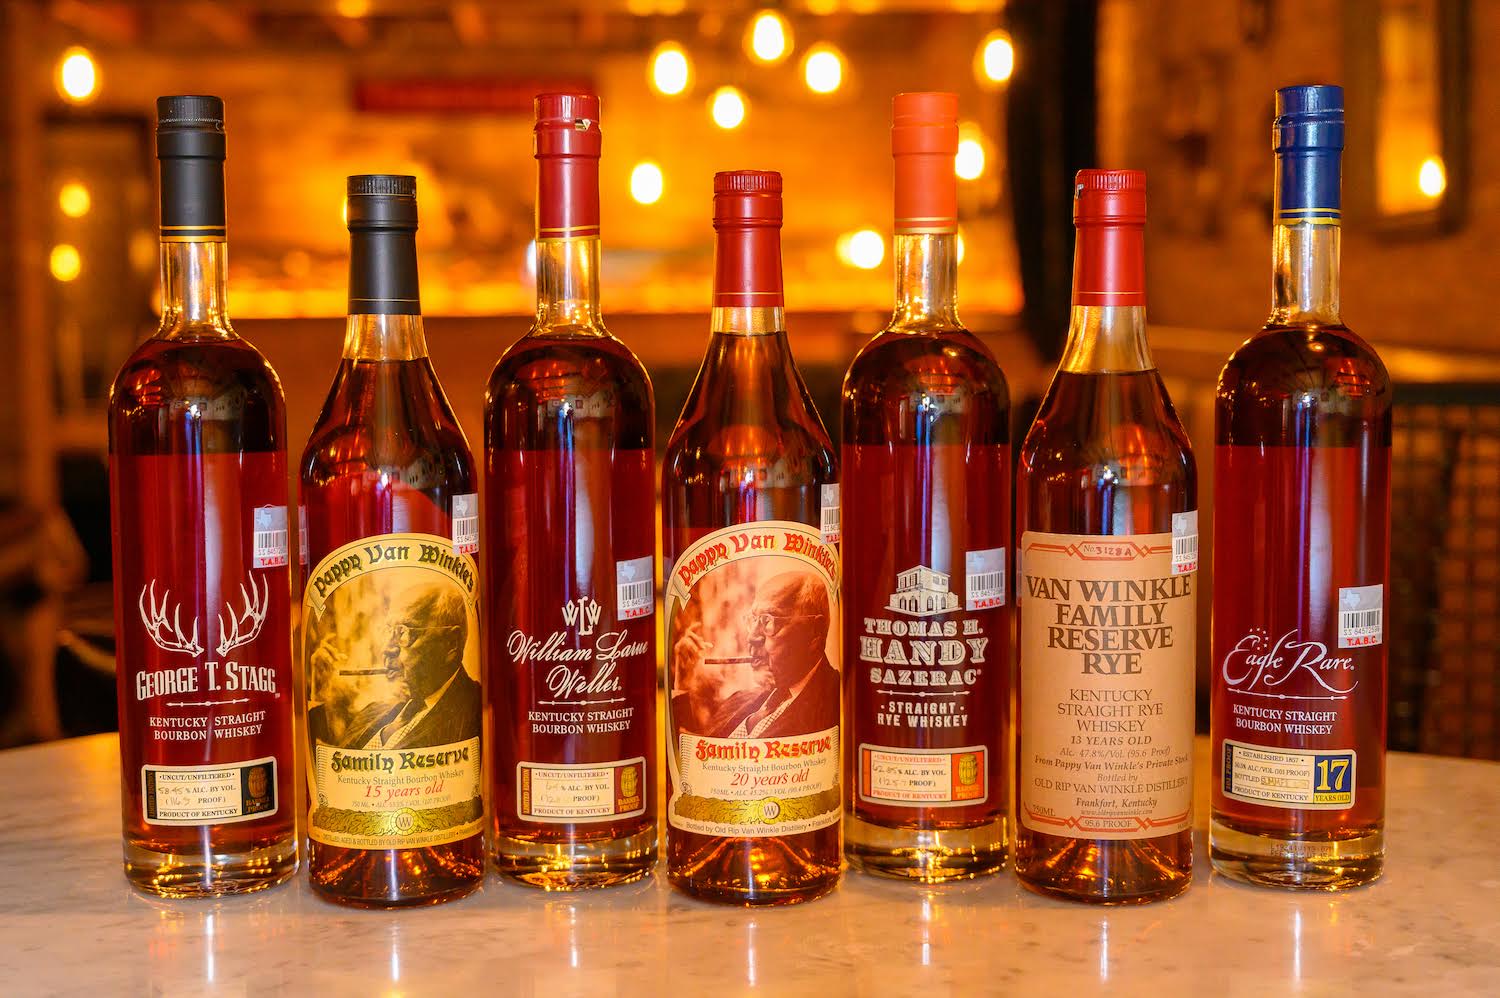 Pappy Van Winkle + Buffalo Trace Collection Auction – Sidecar at Solms Inn